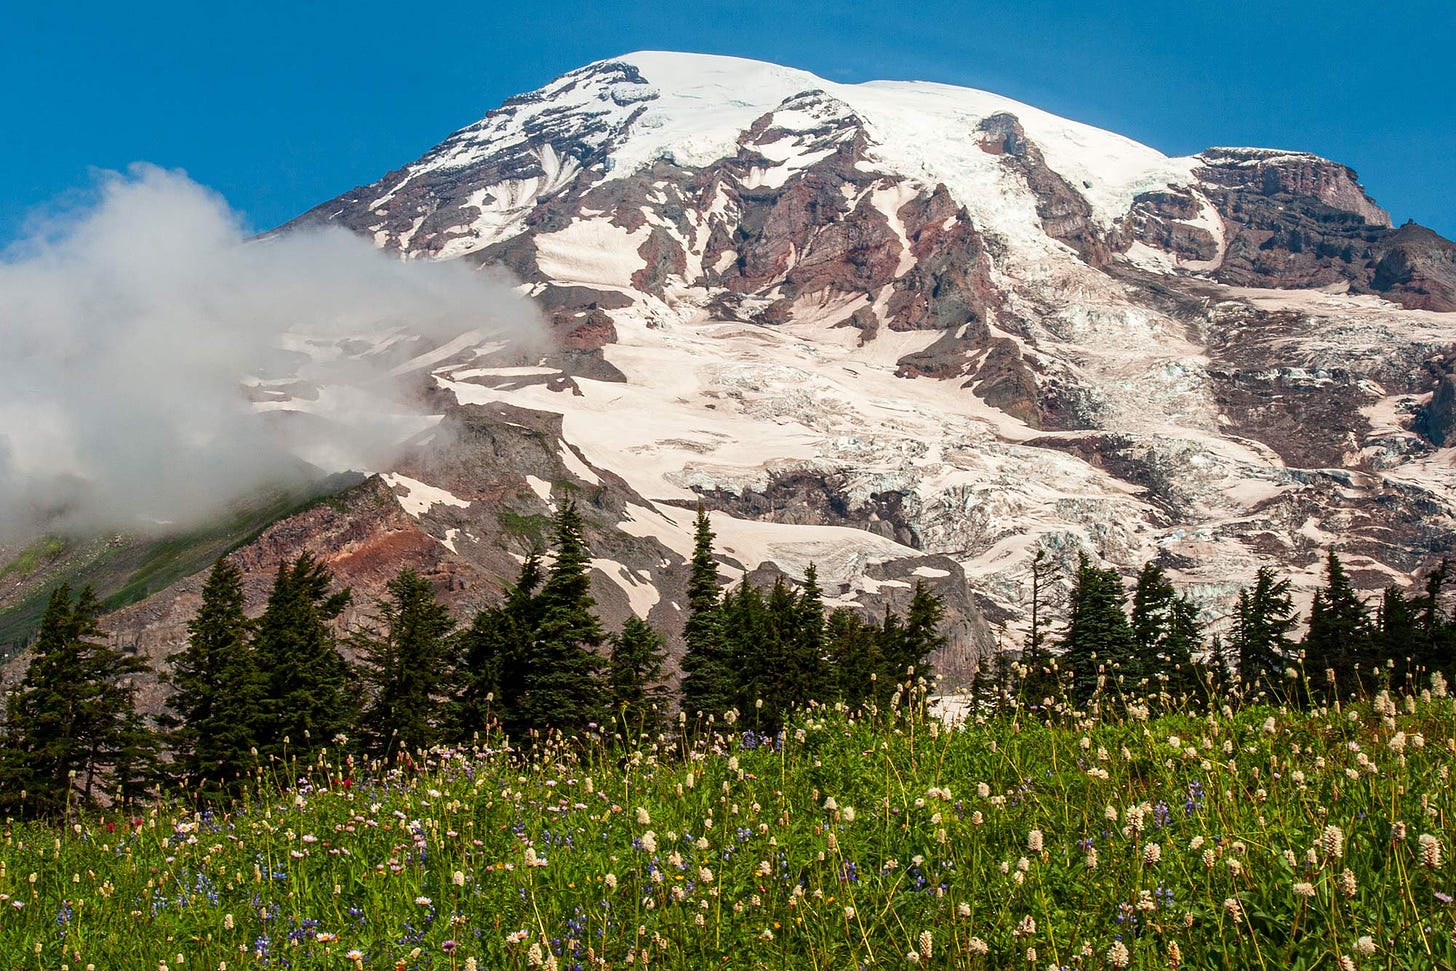 Behind a field of white flowers, the snow-capped summit of Mount Rainier fills the shot, white glaciers and snowfields running over reddish brown exposed rocks, beneath a shockingly blue sky, a wisp of cloud hinted arcing above the summit while a gray cloud obscured the western slope